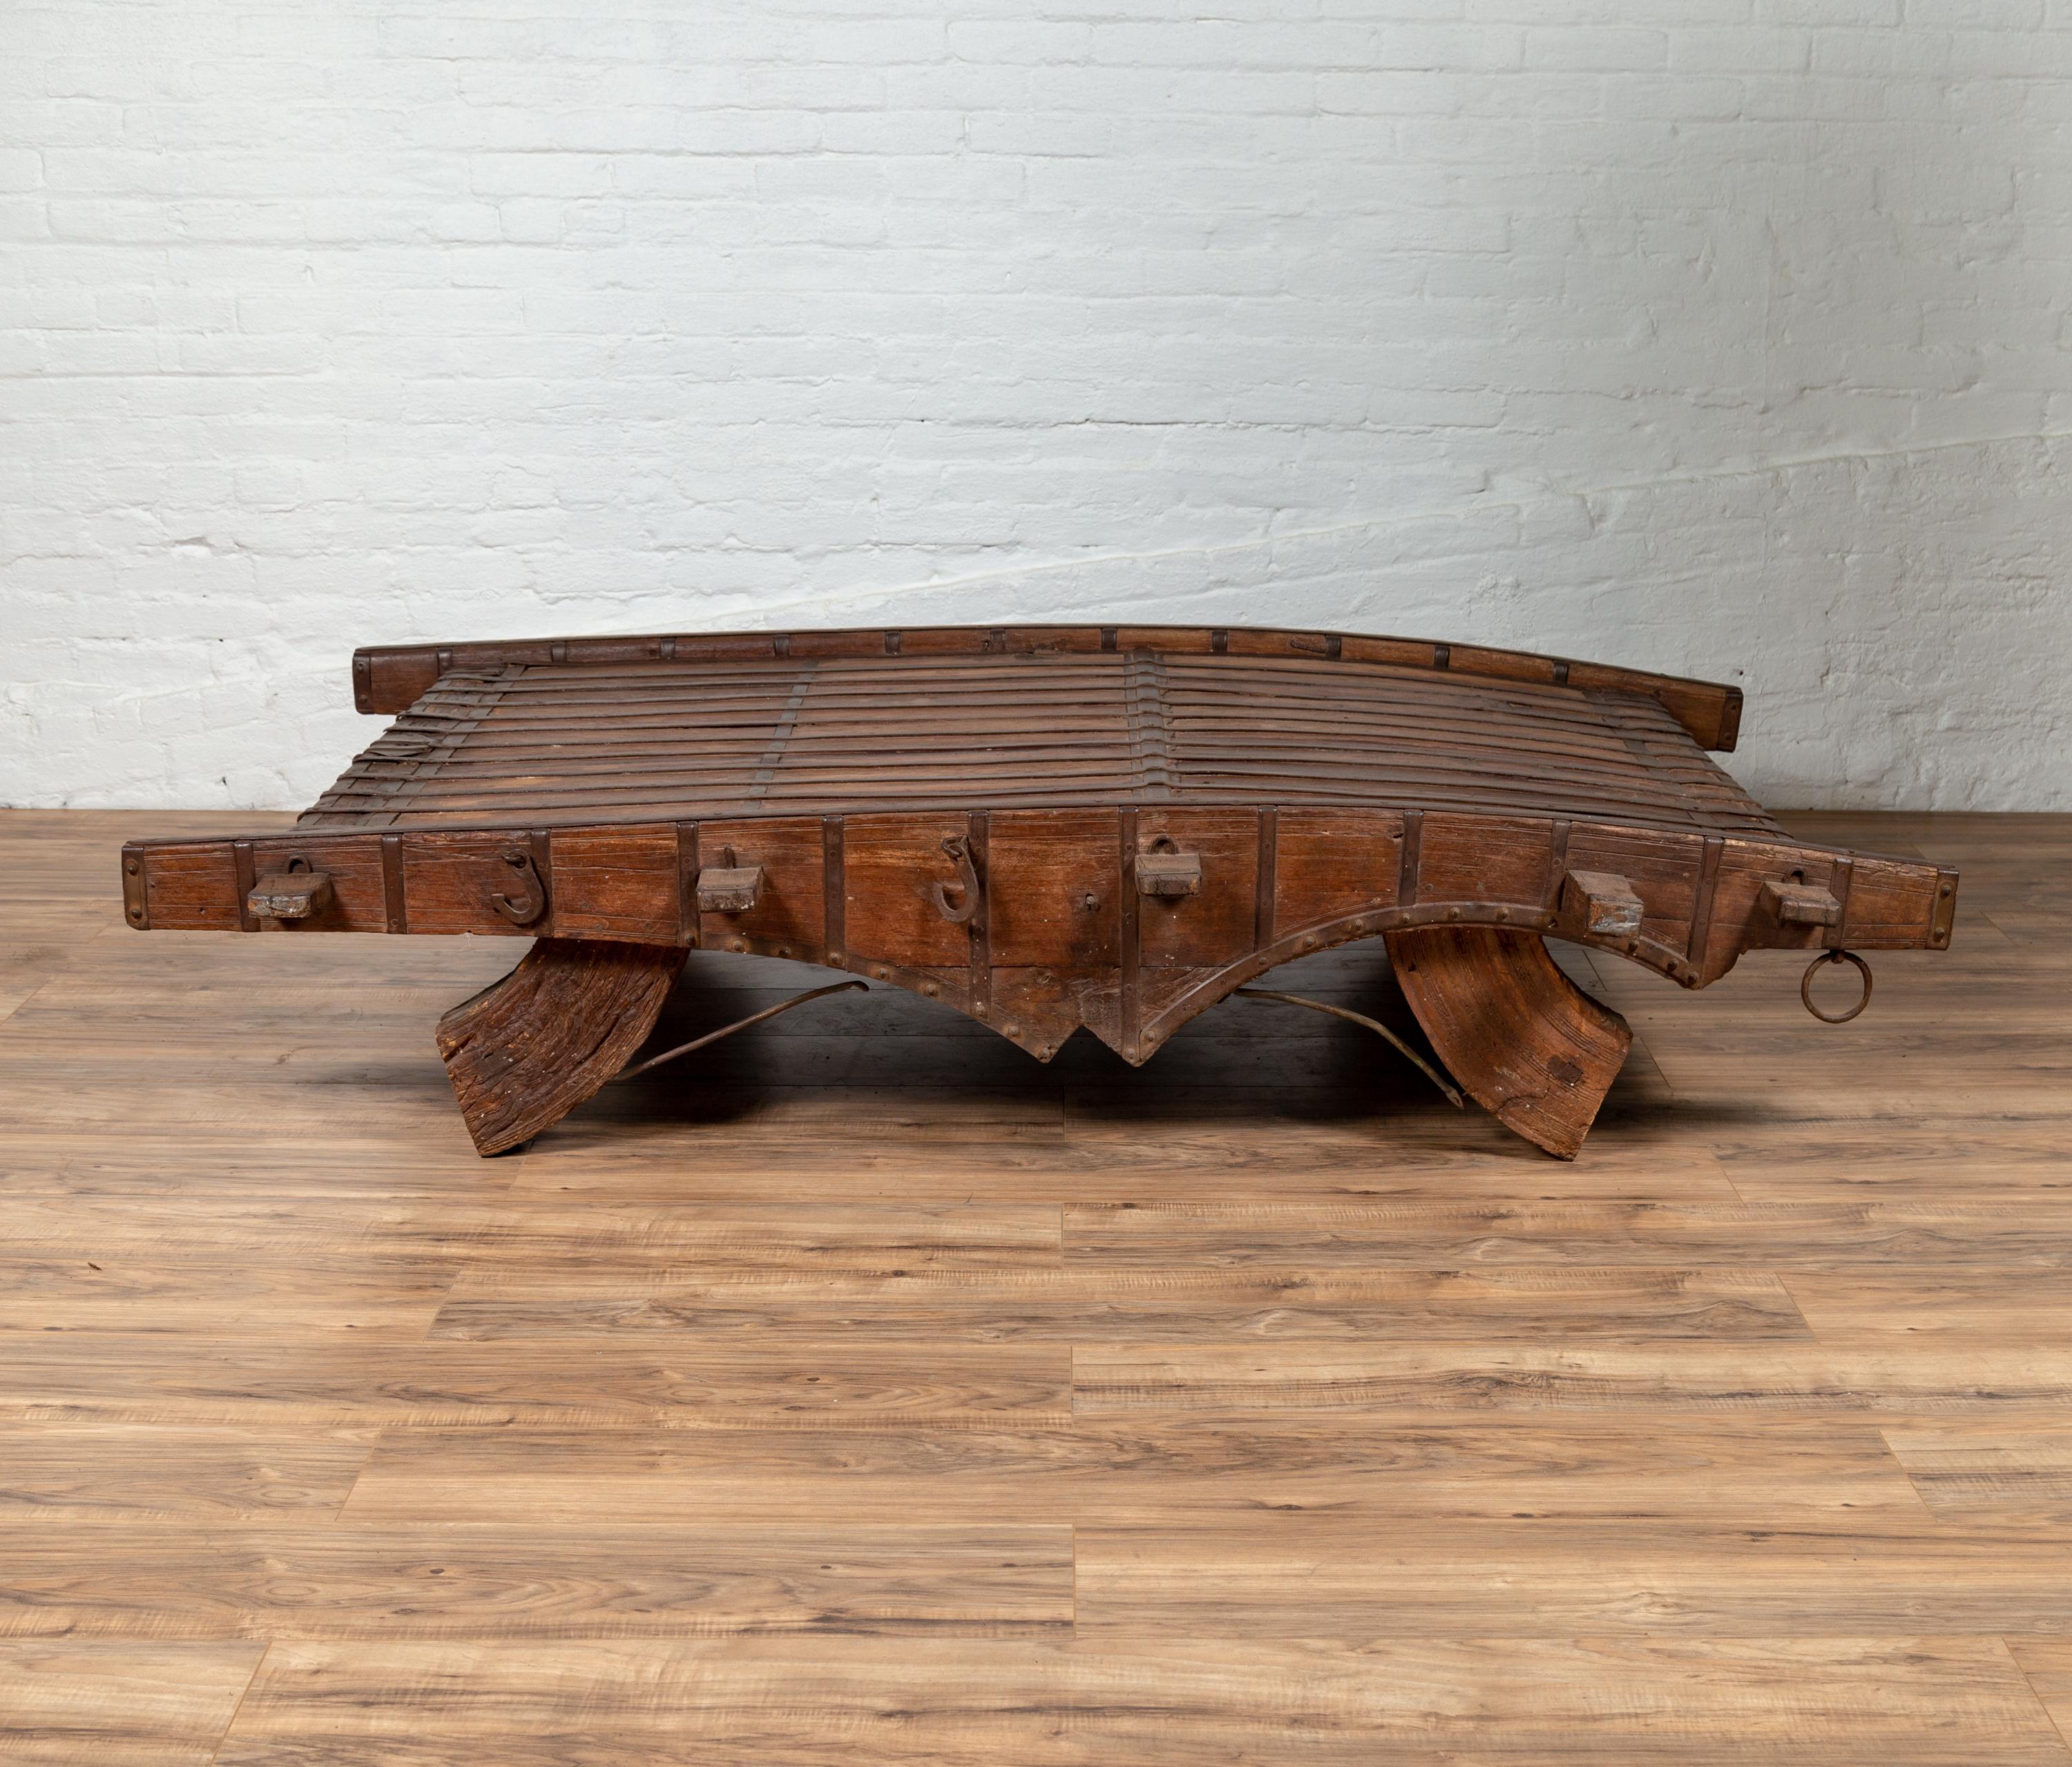 An Indian rustic wooden ox cart from the 19th century, made into a coffee table with convex top and metal accents. We have two tables available, priced and sold individually. Perfect to be used as a coffee table, this conversation piece is an old